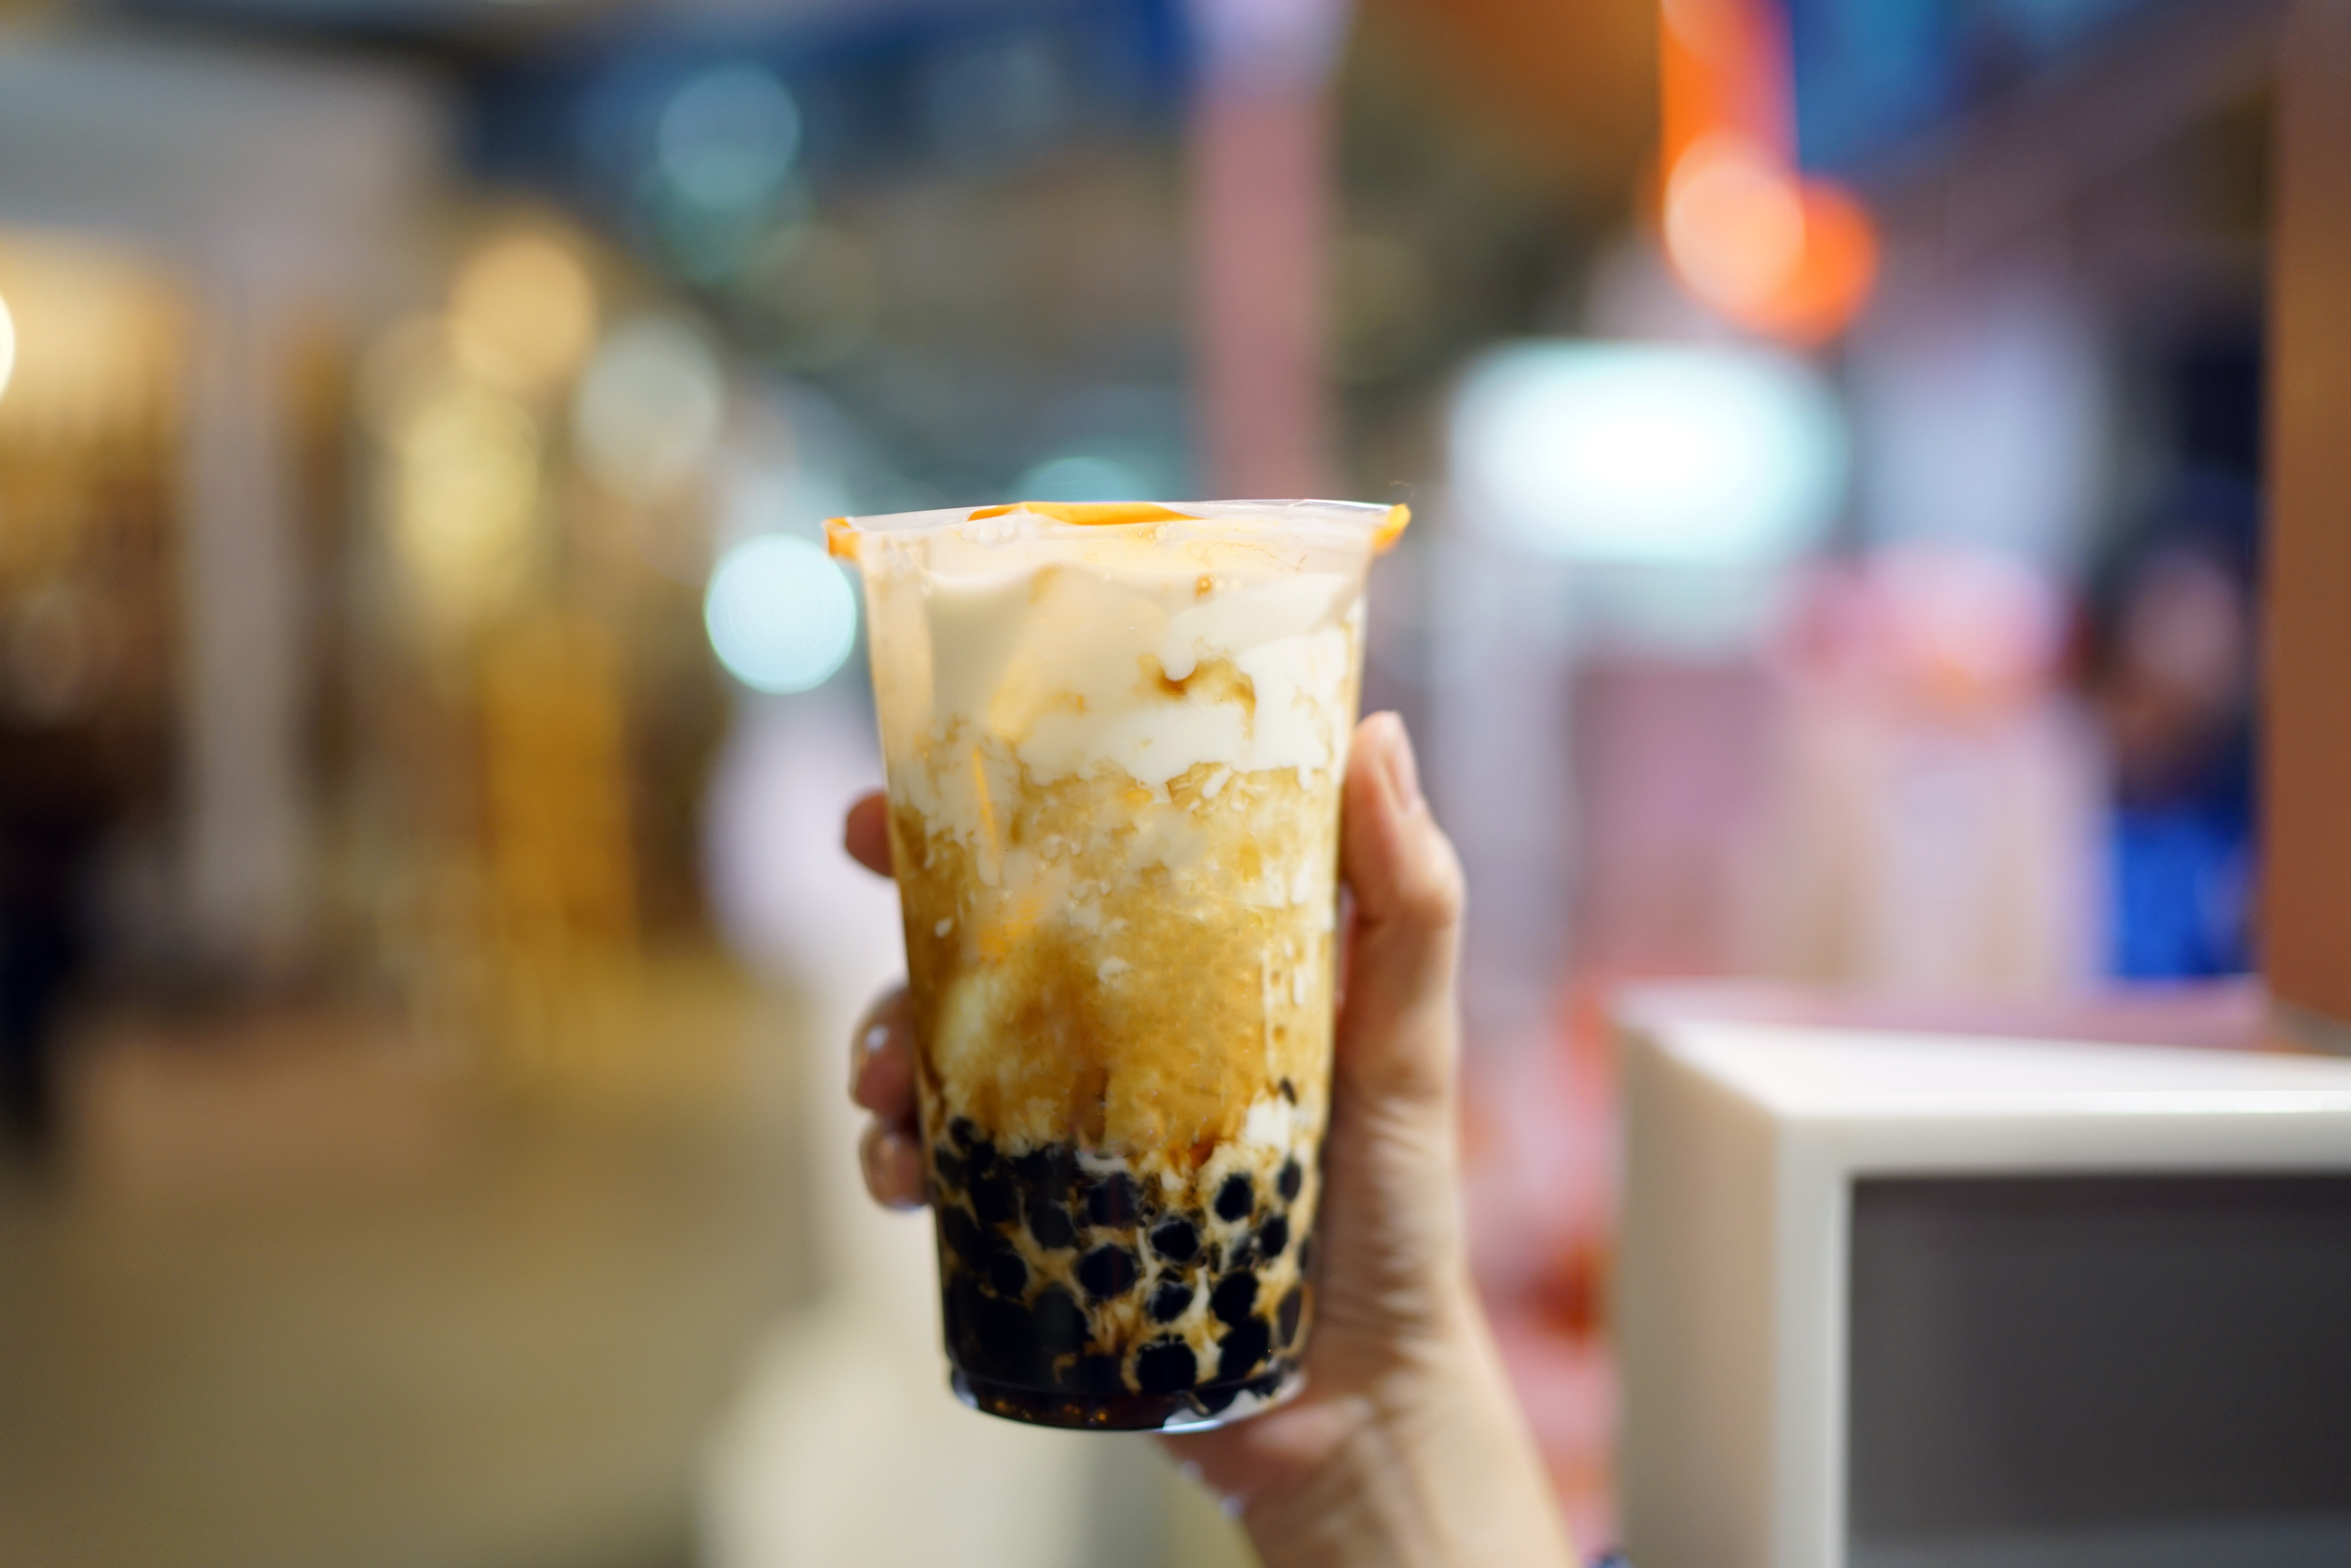 Now you can make your own bubble tea at home. Photo: Shutterstock